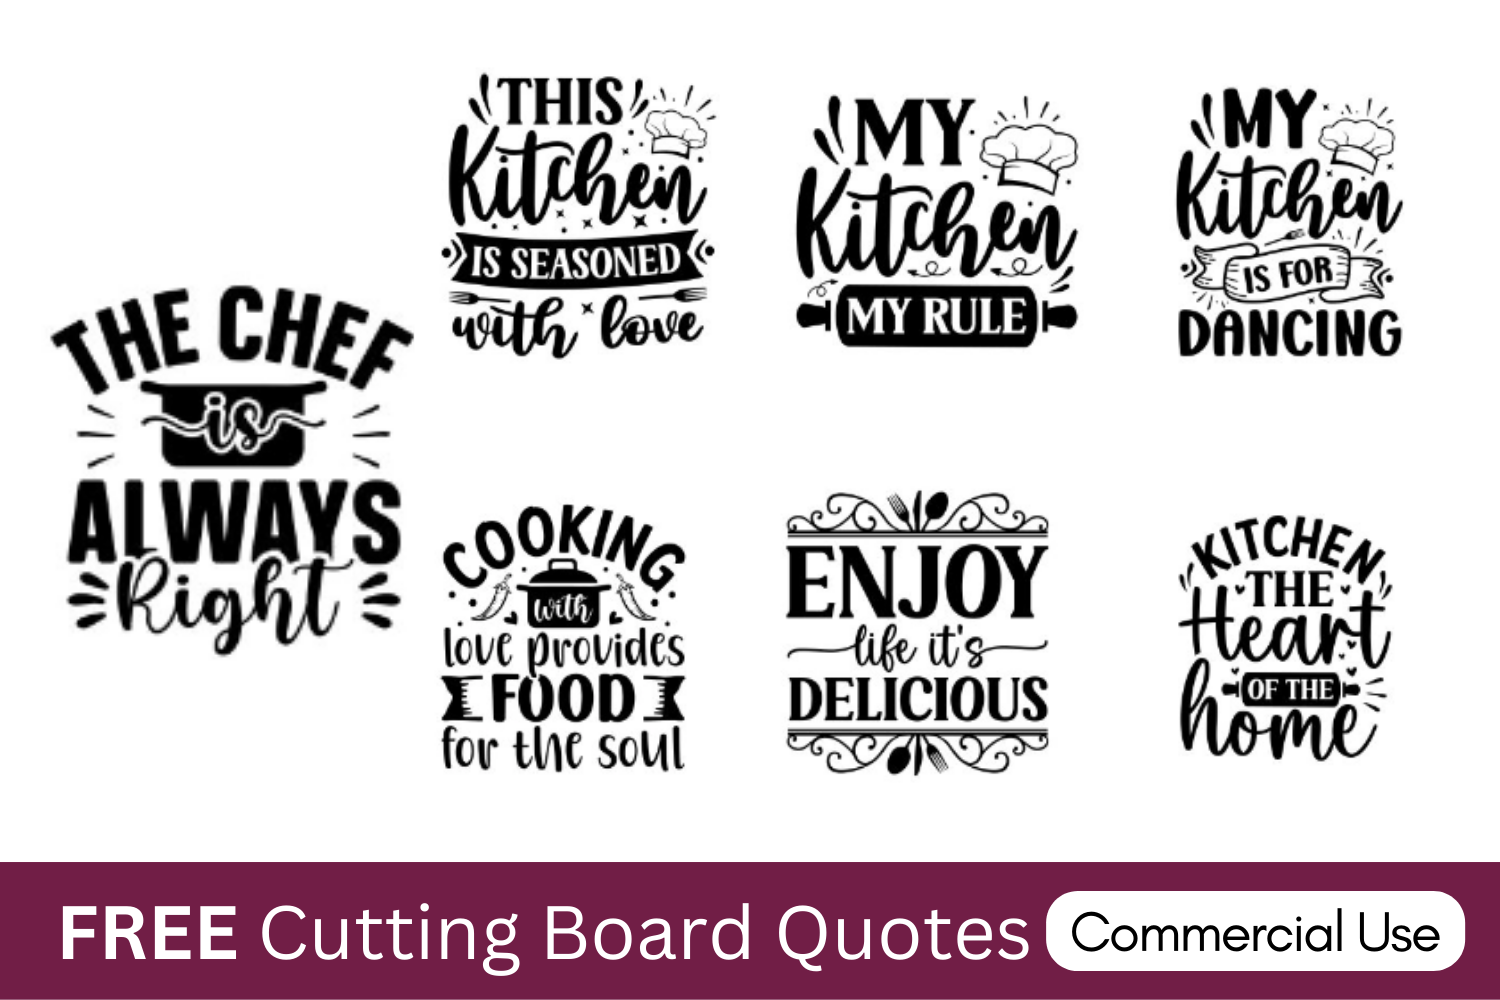 https://vectordad.com/wp-content/uploads/2022/12/Cutting-Board-sayings-and-quotes-svg-designs.png